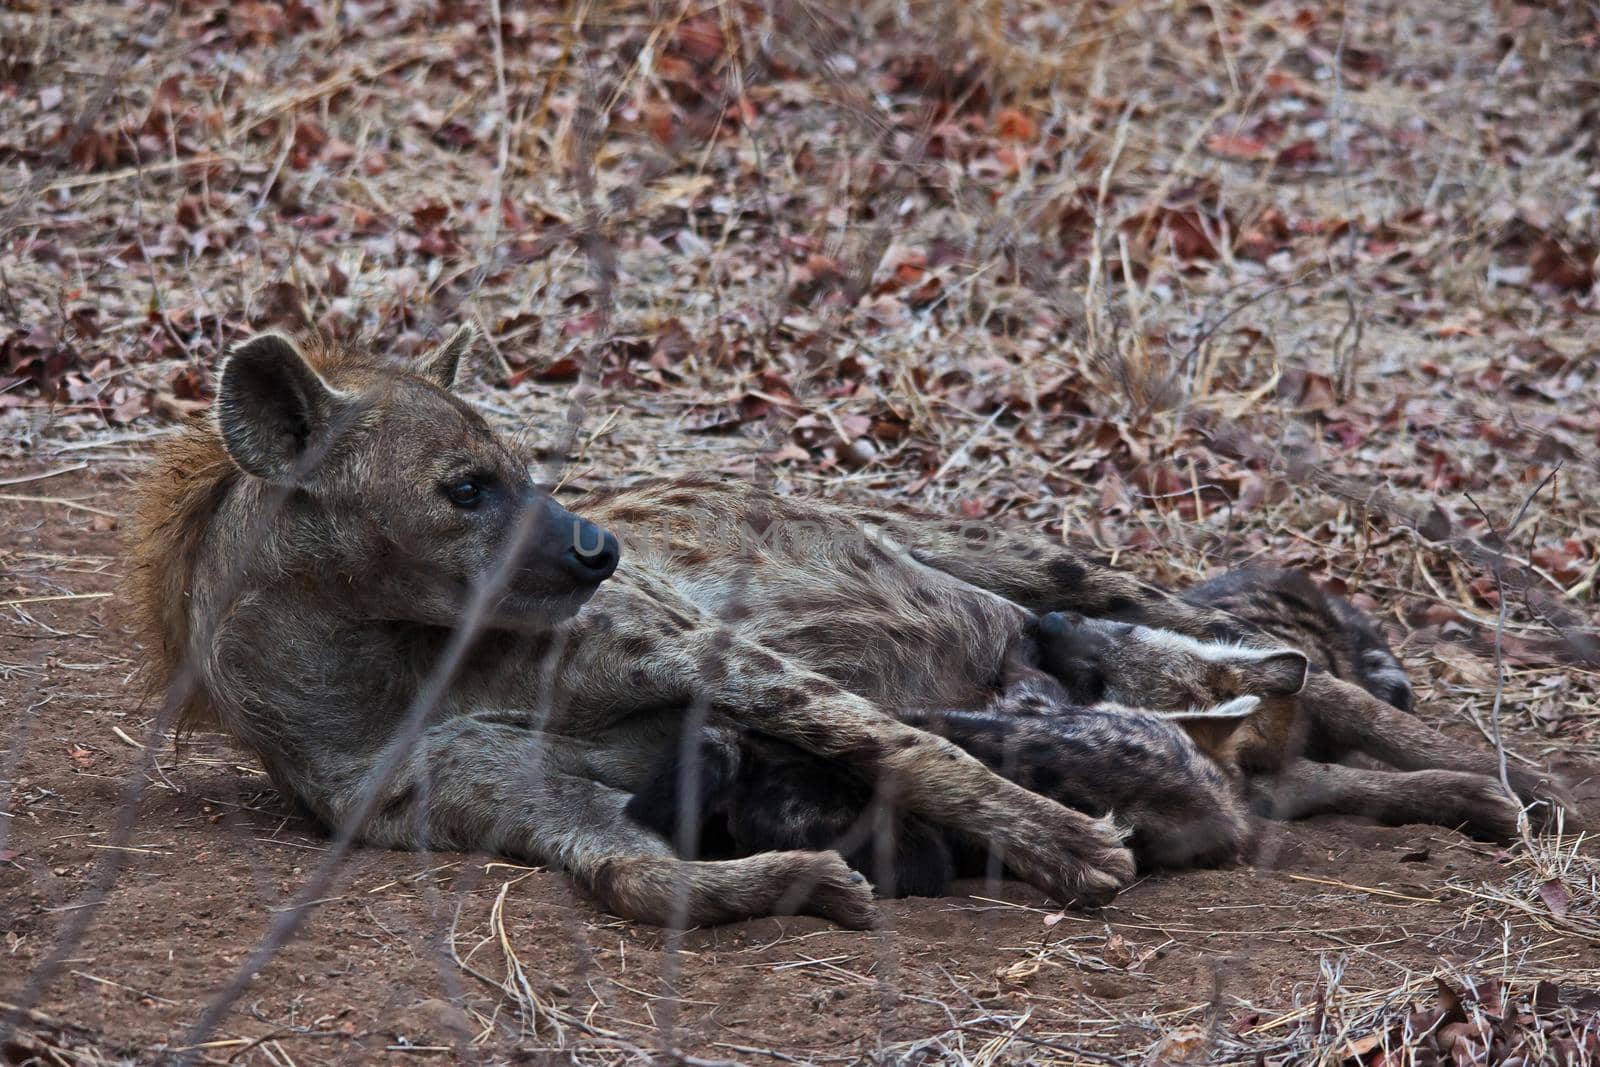 Spotted Hyena (Crocuta crocuta) with cubs 14884 by kobus_peche